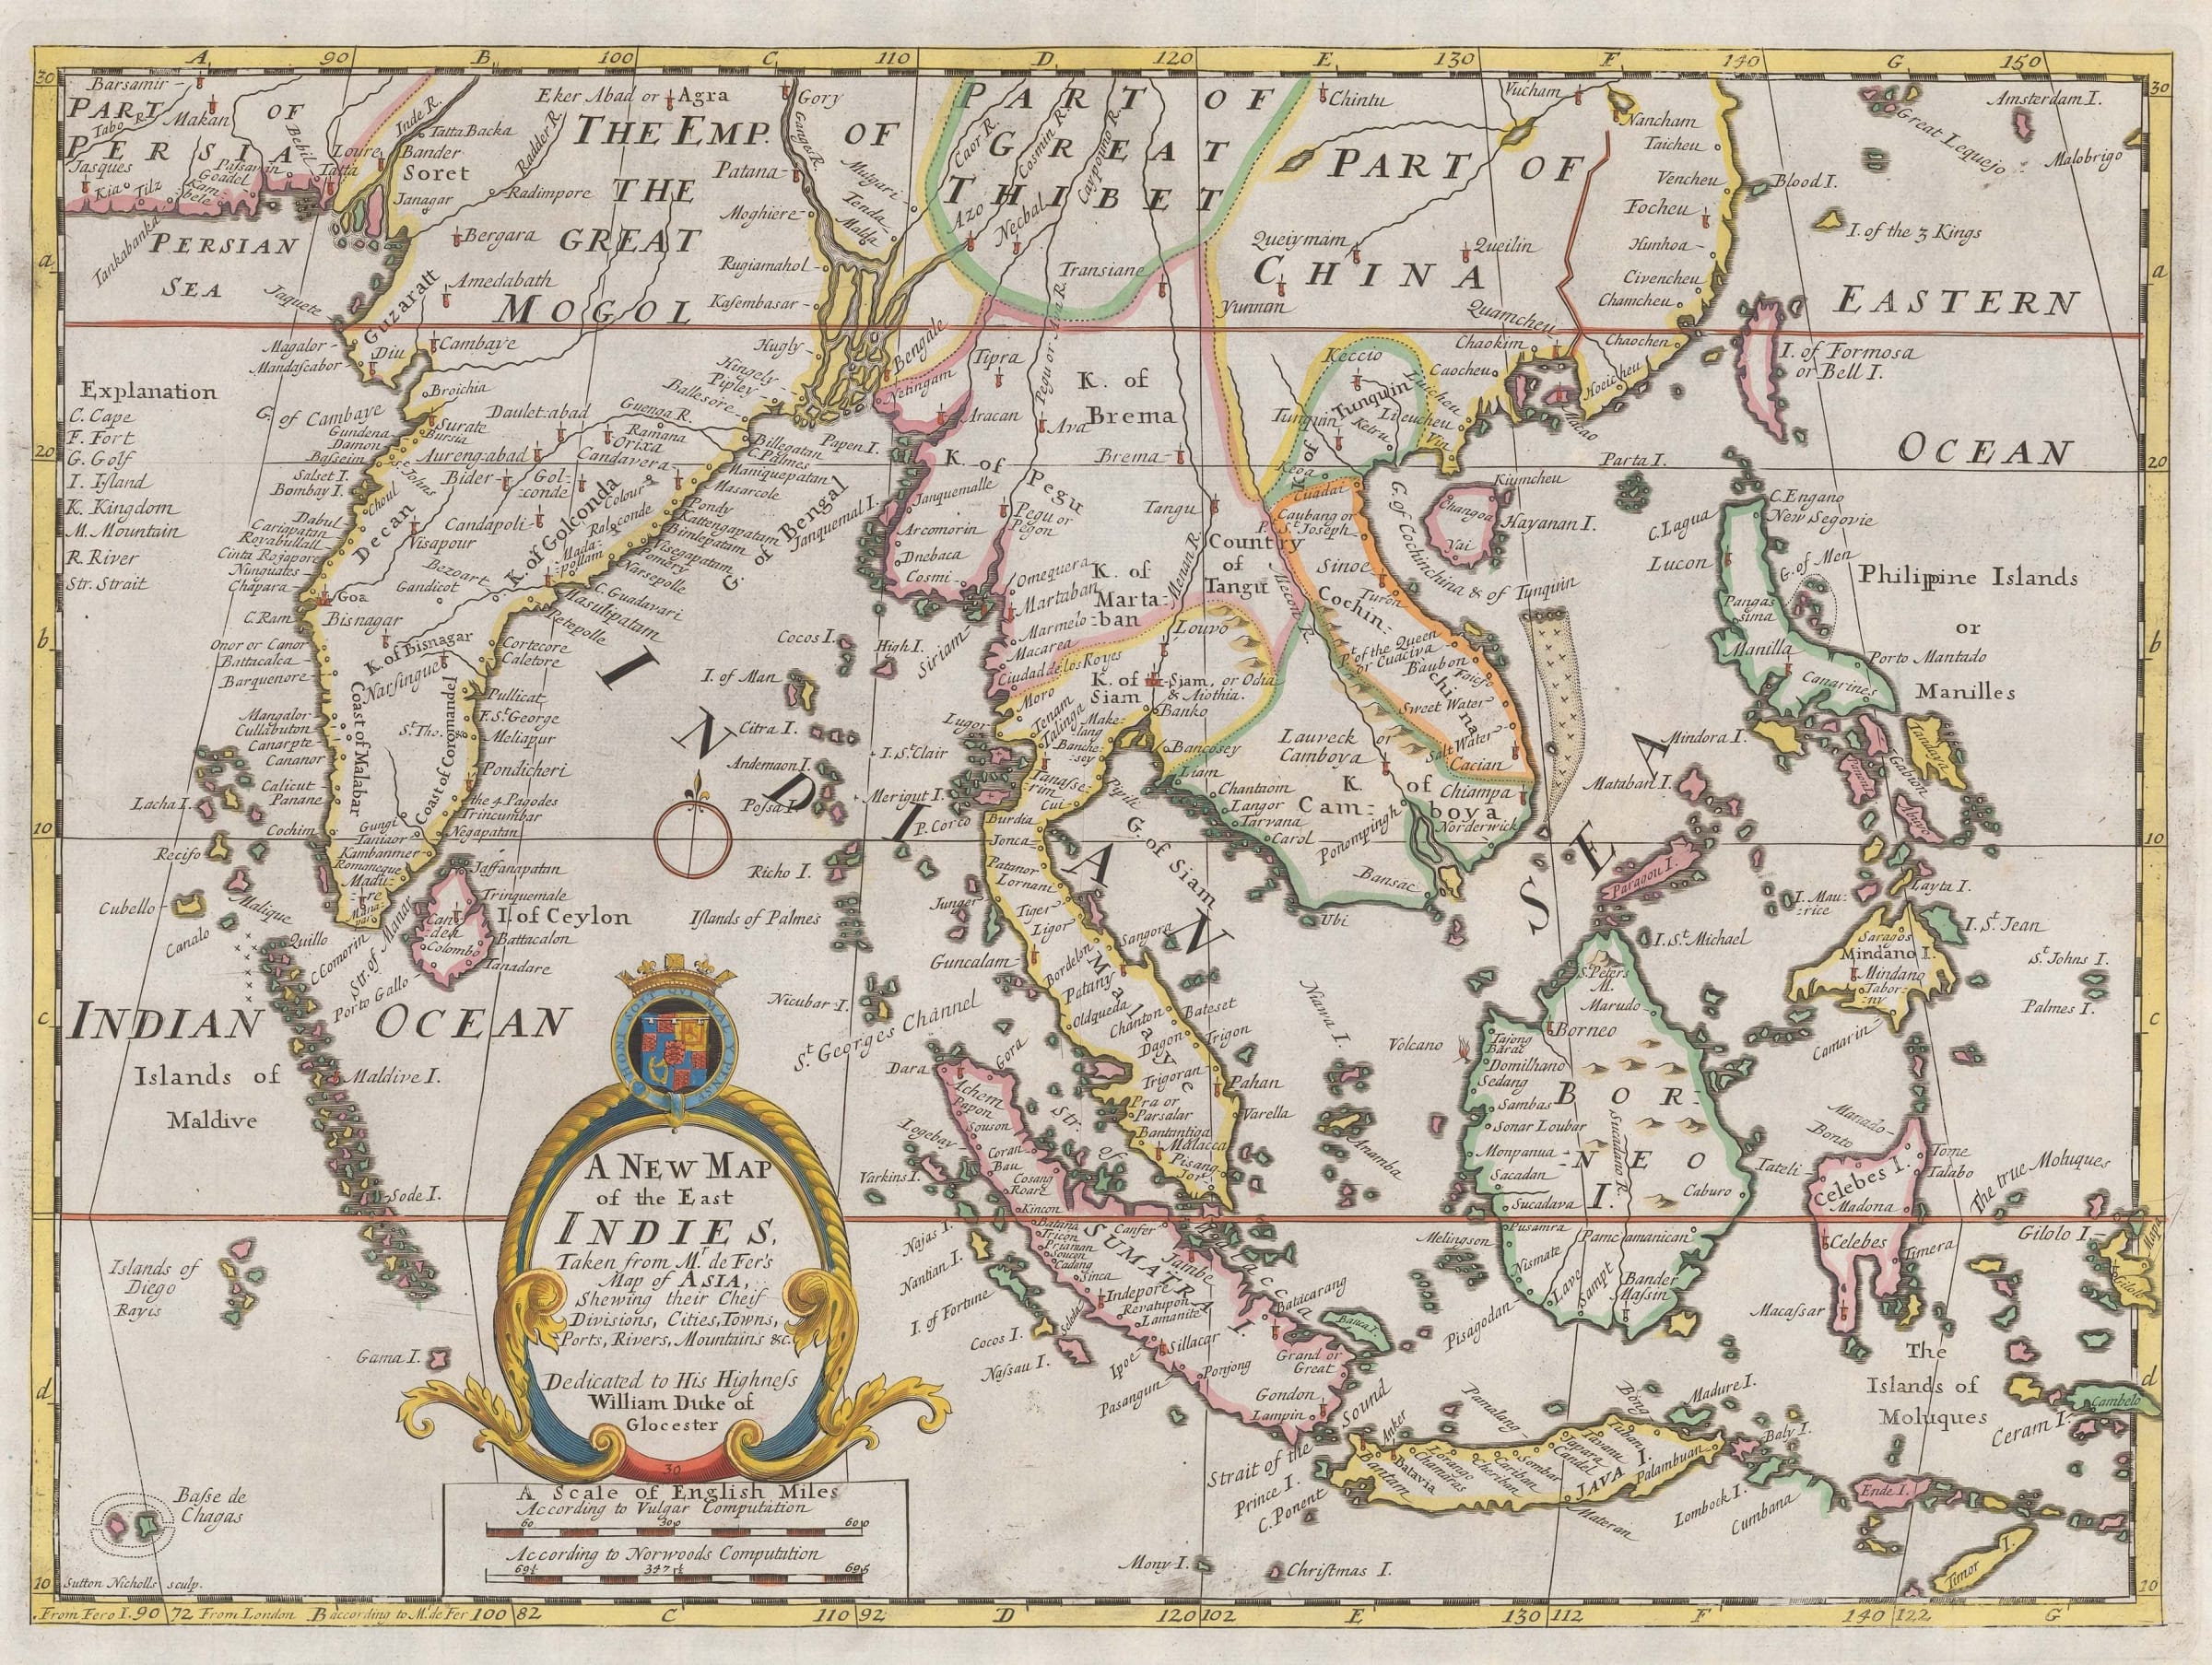 Edward Wells, A New Map of the East Indies, 1700 | The Map House